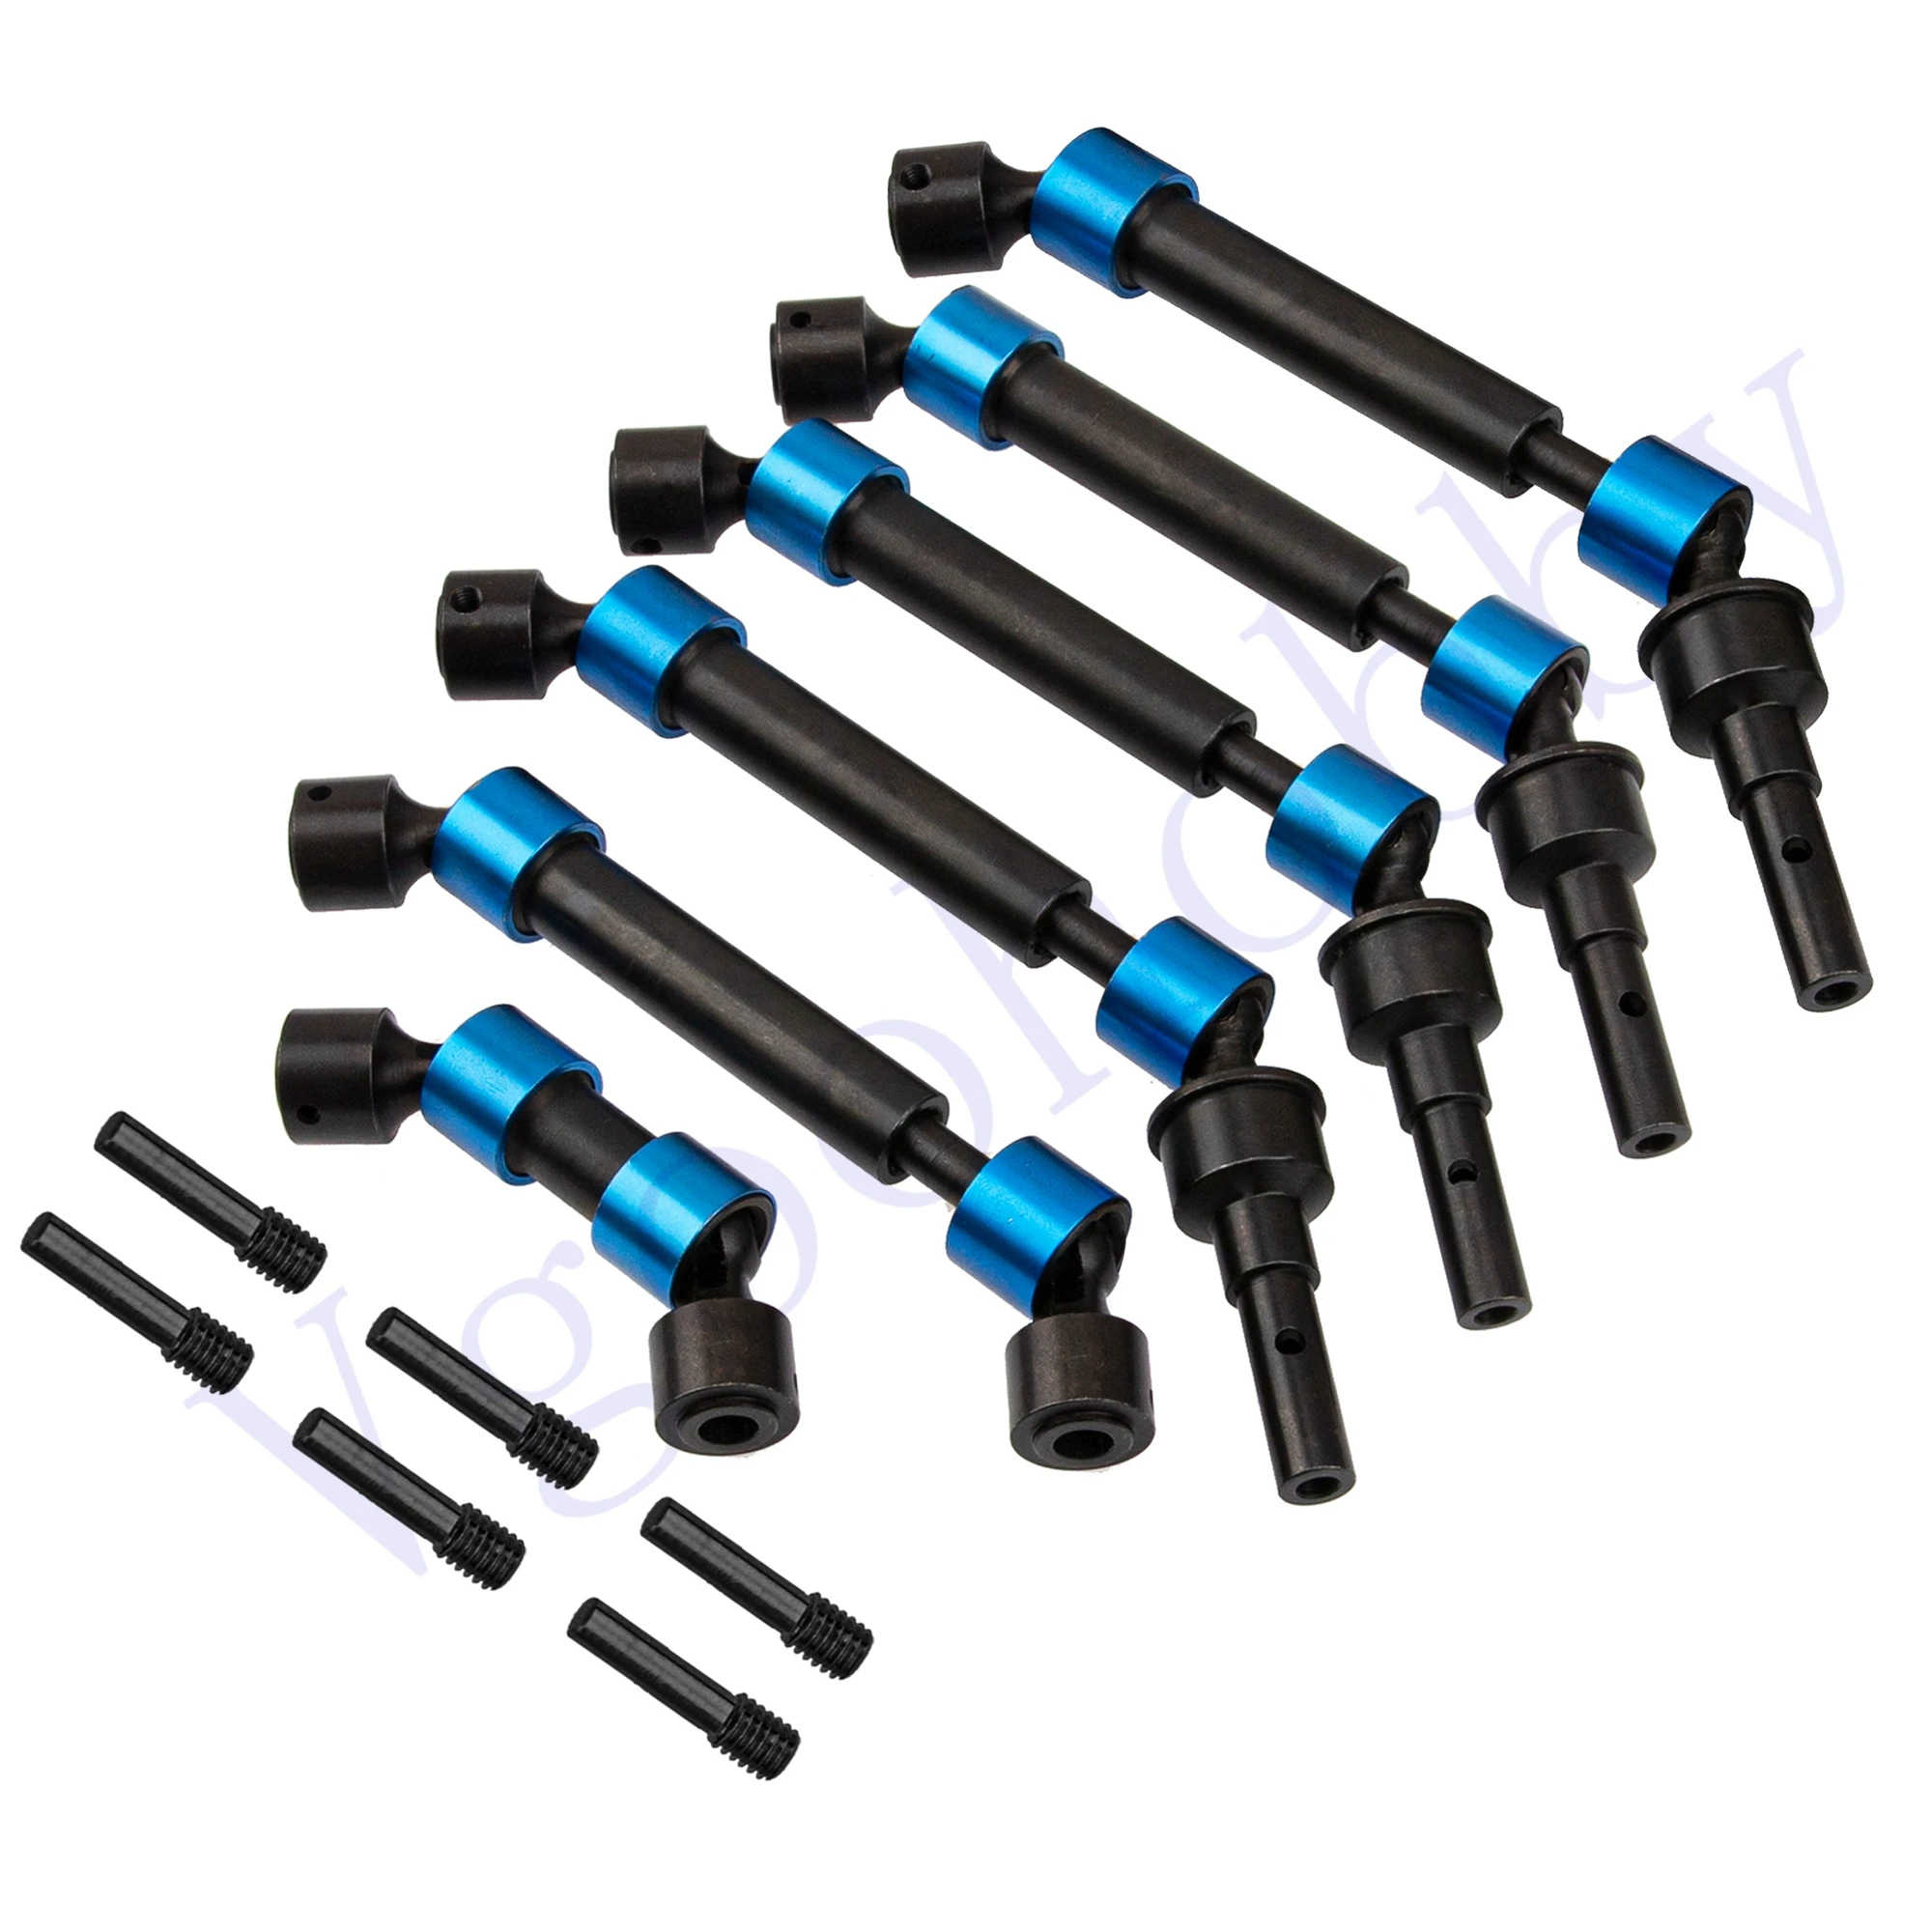 6Pcs Hard Steel Front Rear CVD Drive Shaft Transmission Axle Upgrade Parts for Traxxas E-Revo 2.0 VXL 86086-4 1/10 RC Car